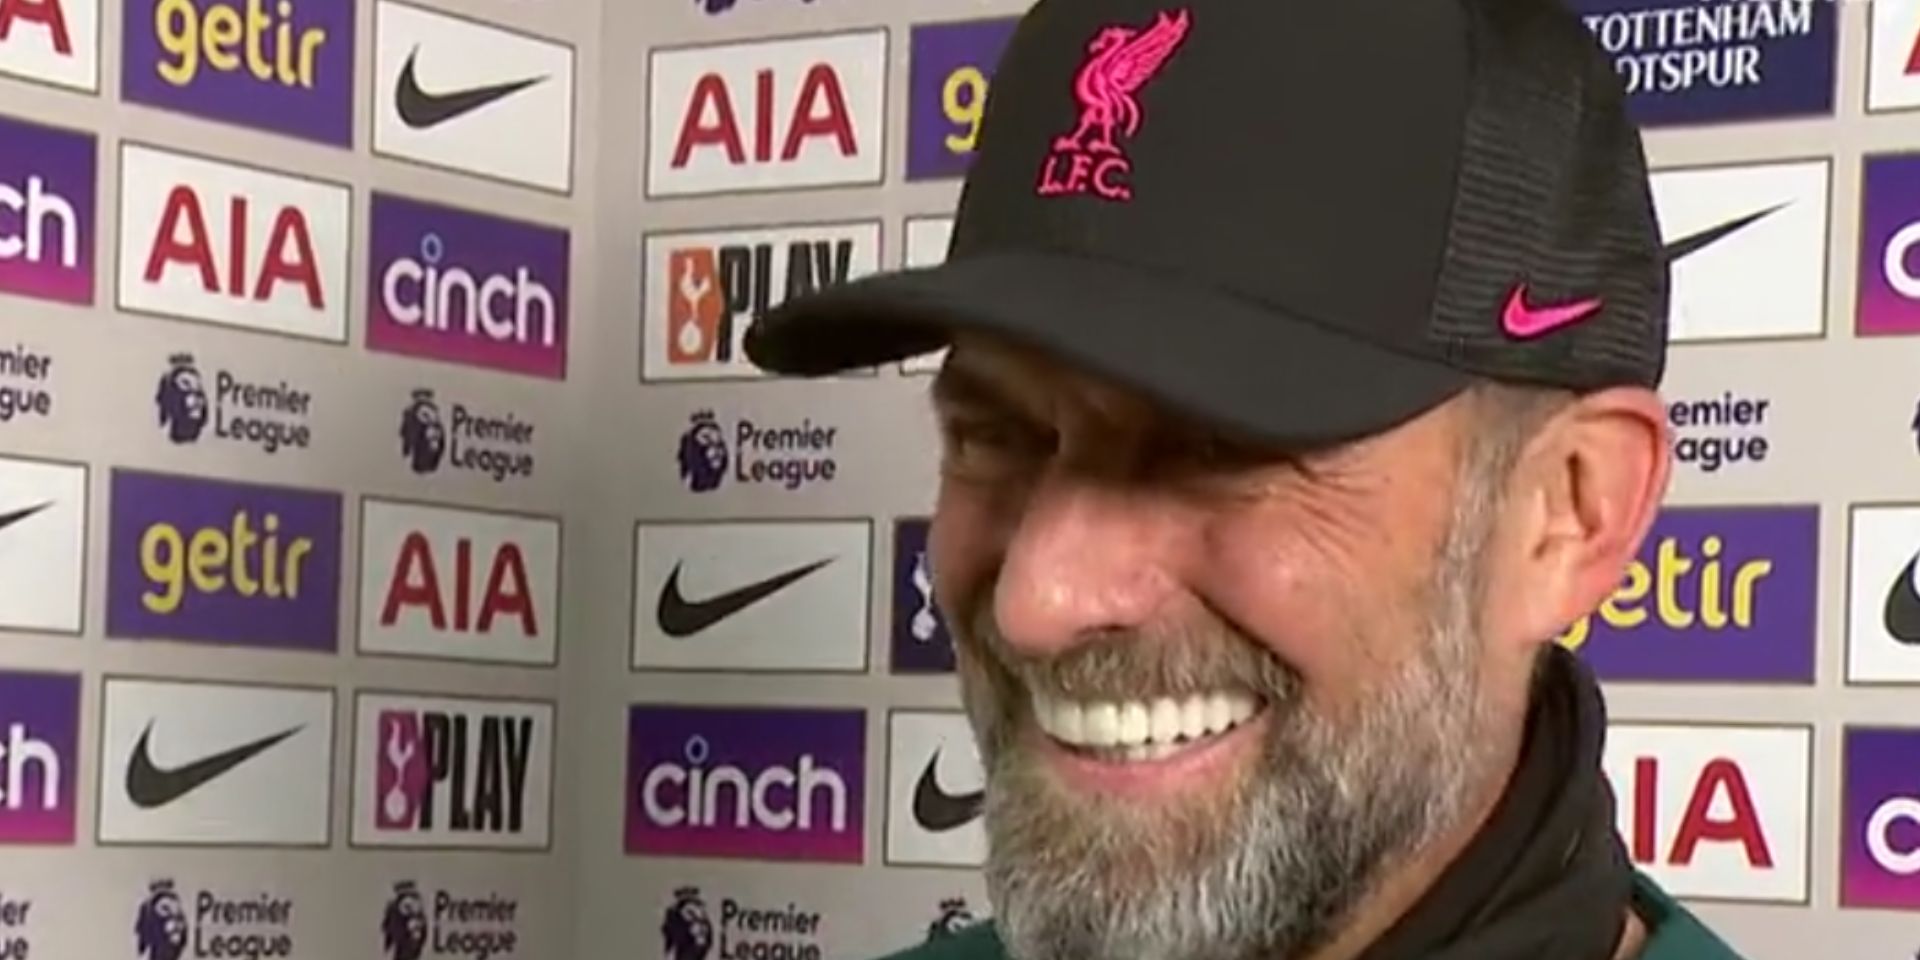 (Video) “I don’t know if that’s possible” – Klopp asked if he feels more attached to Liverpool after freedom of city